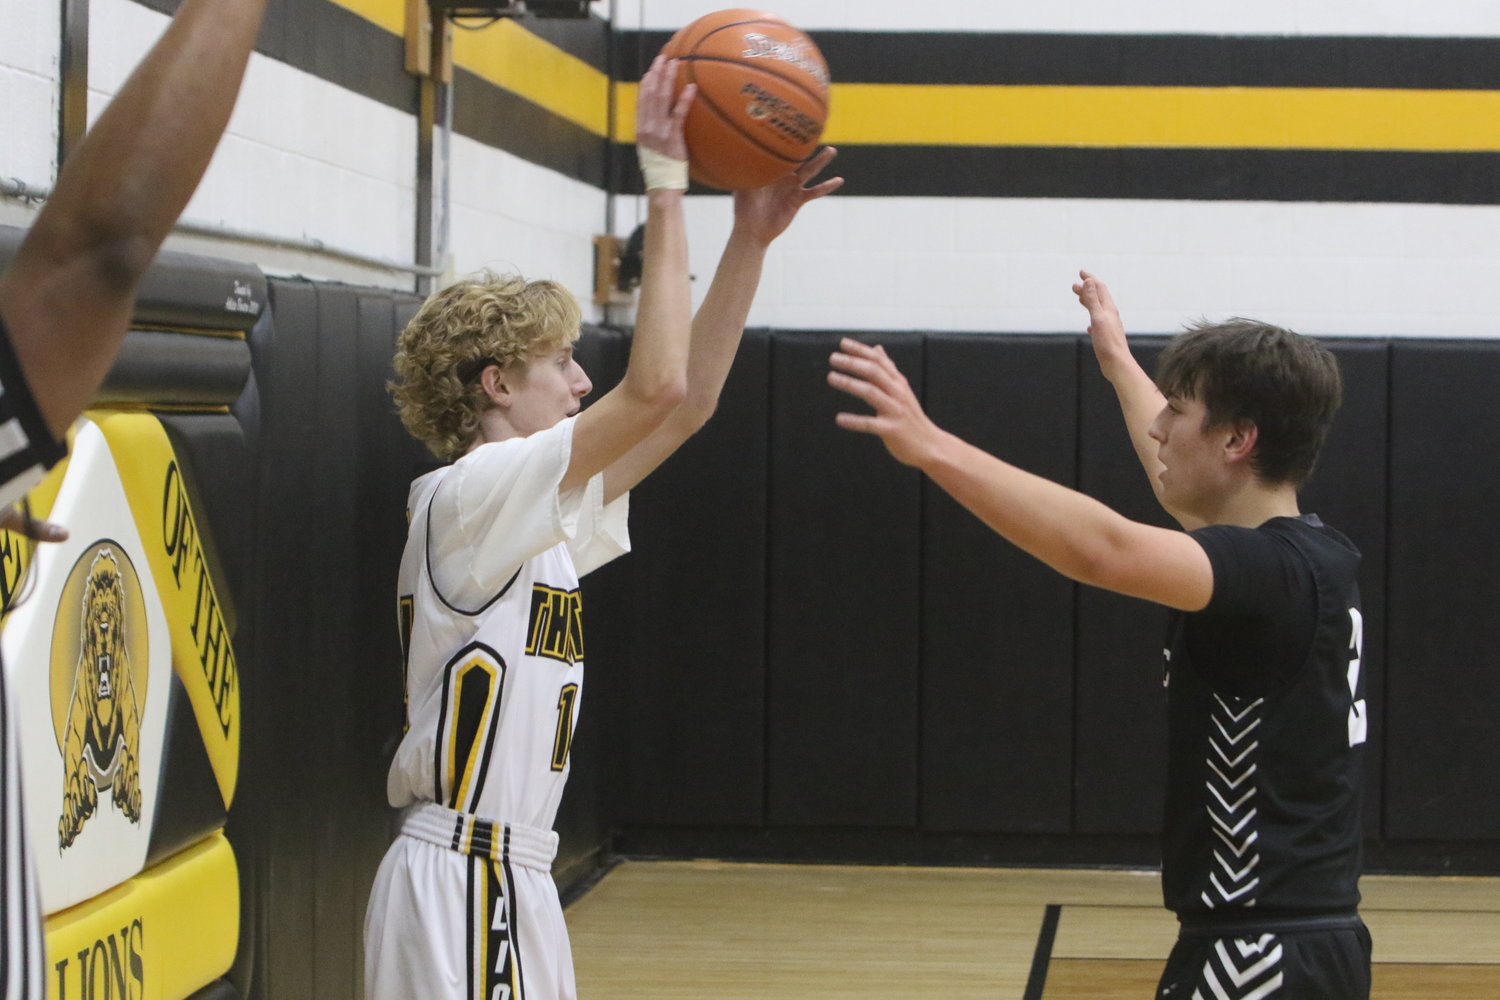 Lone Tree's Drew Gauley looks to inbound the ball against Hillcrest's Seth Ours.